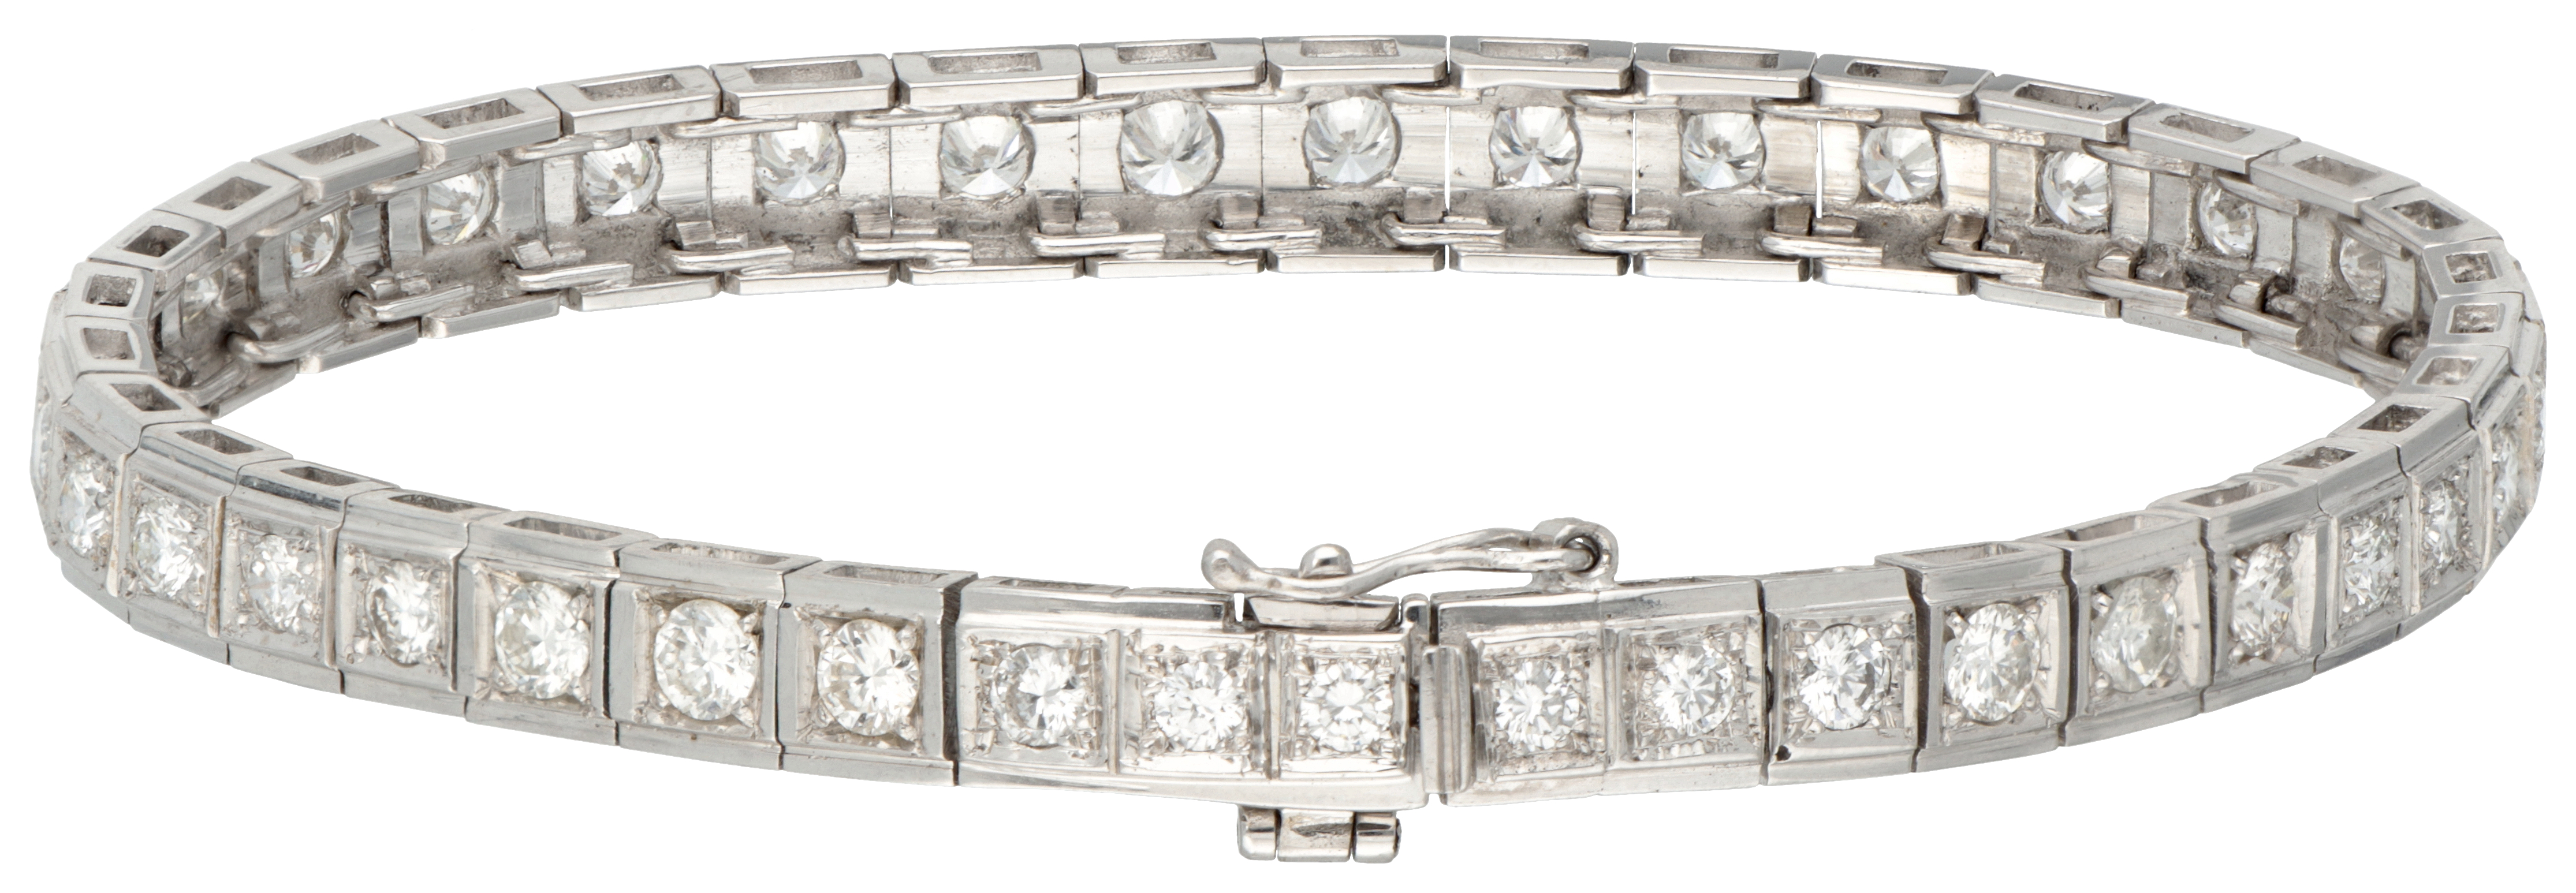 18K. White gold tennis bracelet set with approx. 4.62 ct. diamond. - Image 3 of 3